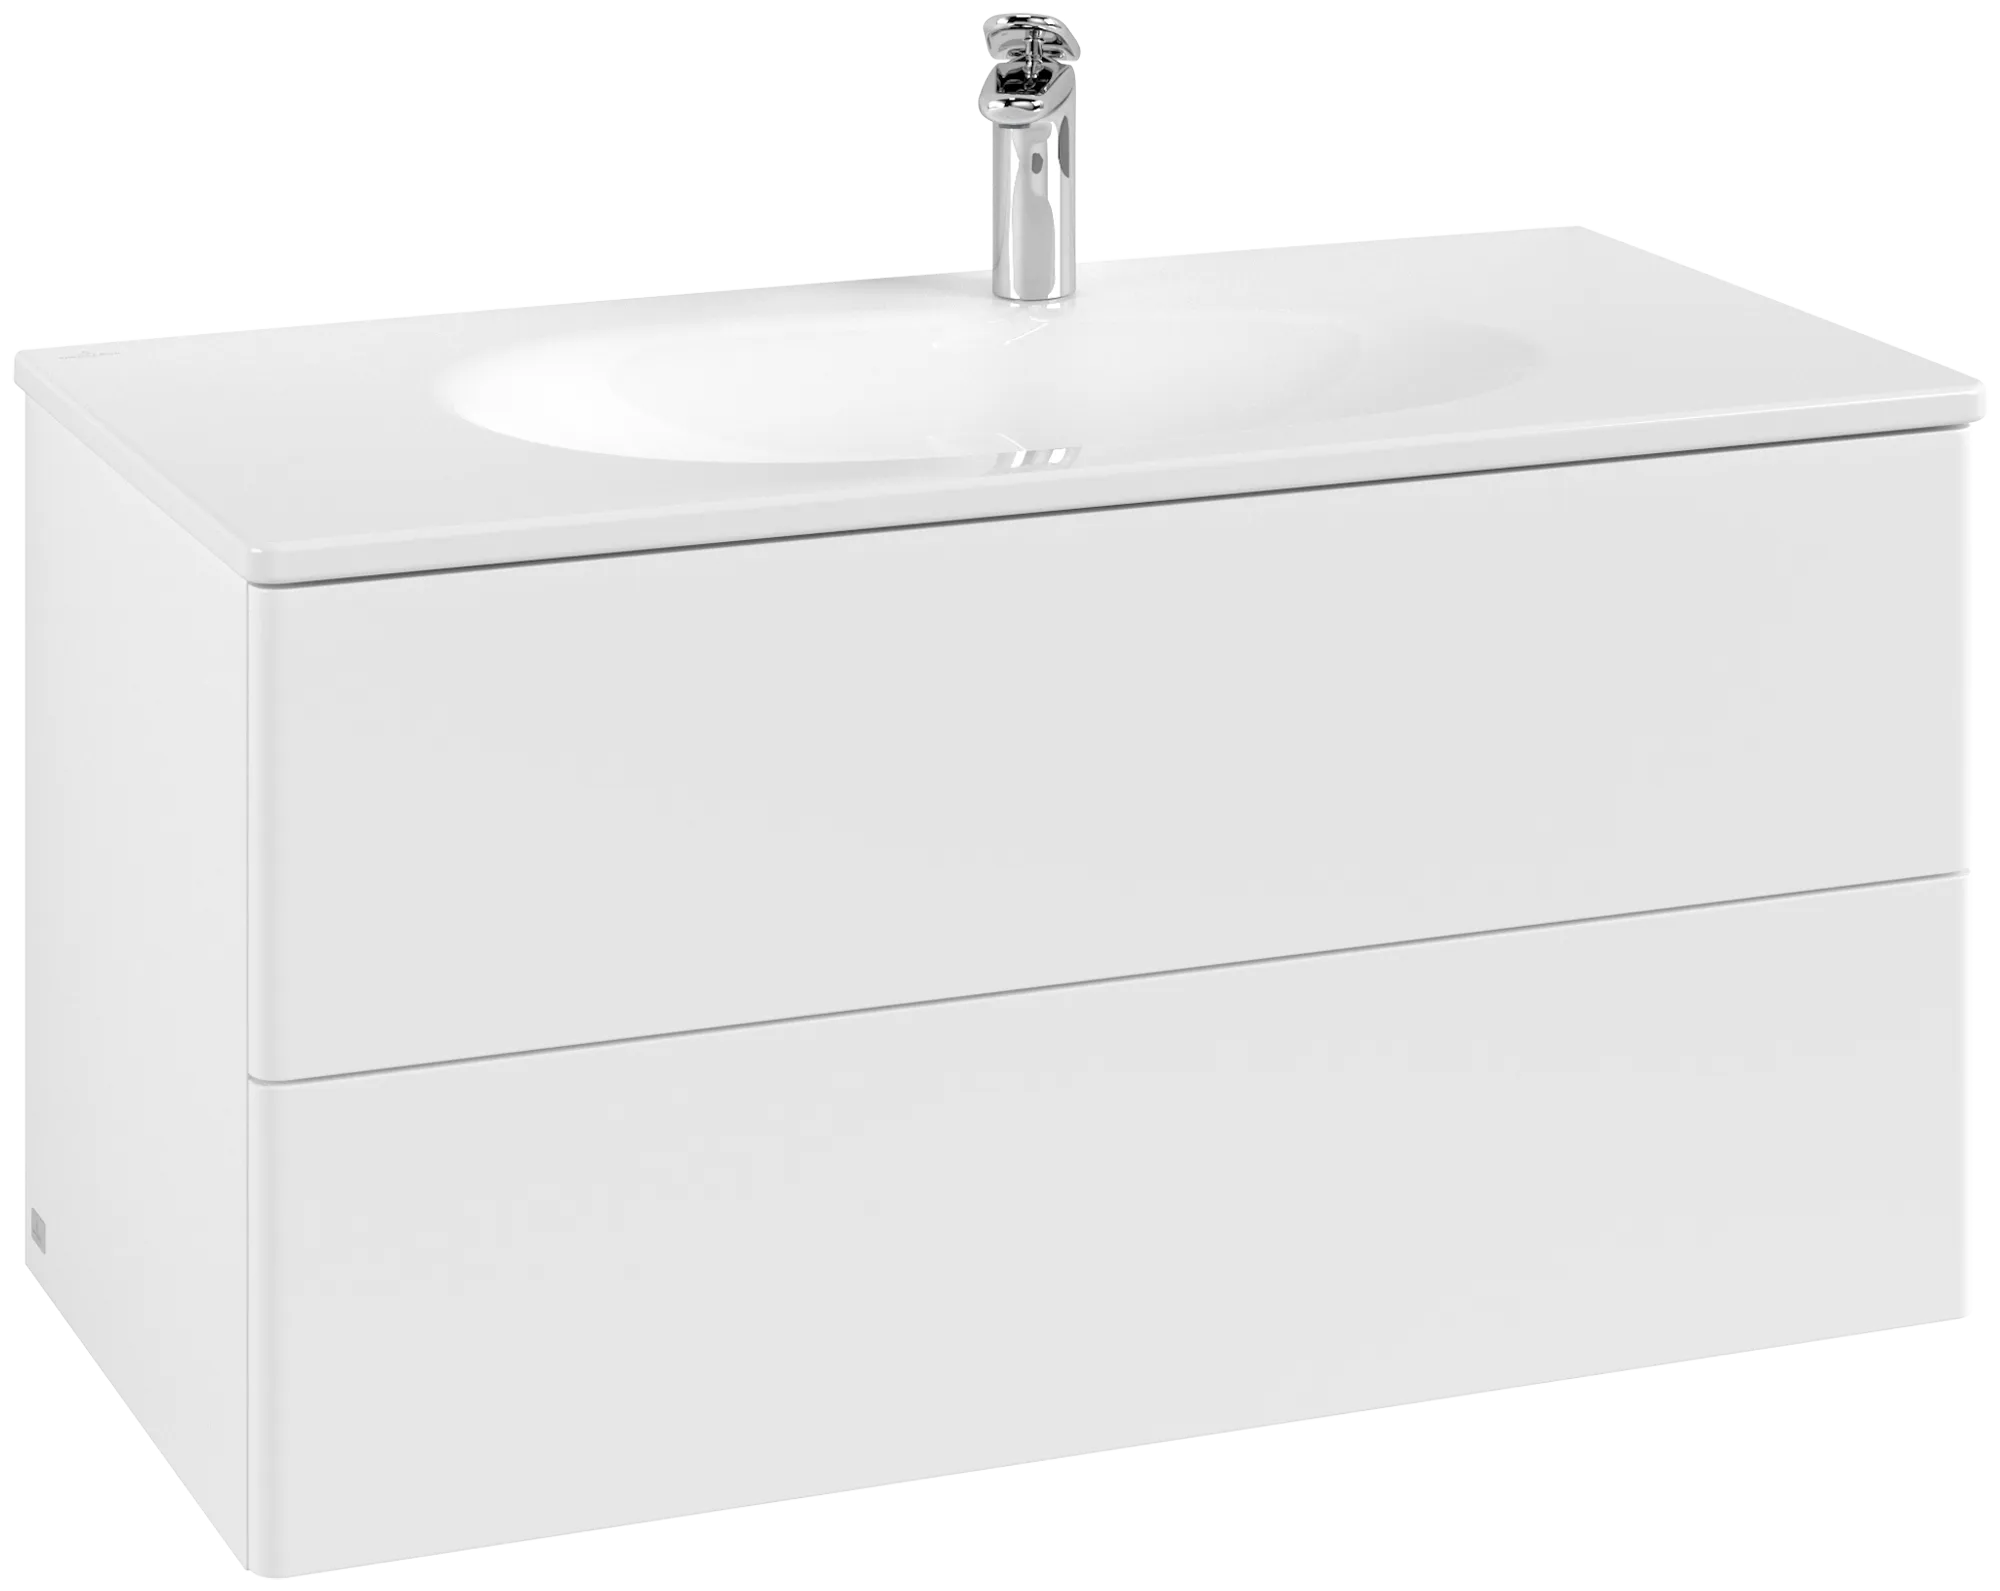 Picture of VILLEROY BOCH Antao Vanity unit, with lighting, 2 pull-out compartments, 988 x 504 x 496 mm, Front without structure, White Matt Lacquer #L05000MT